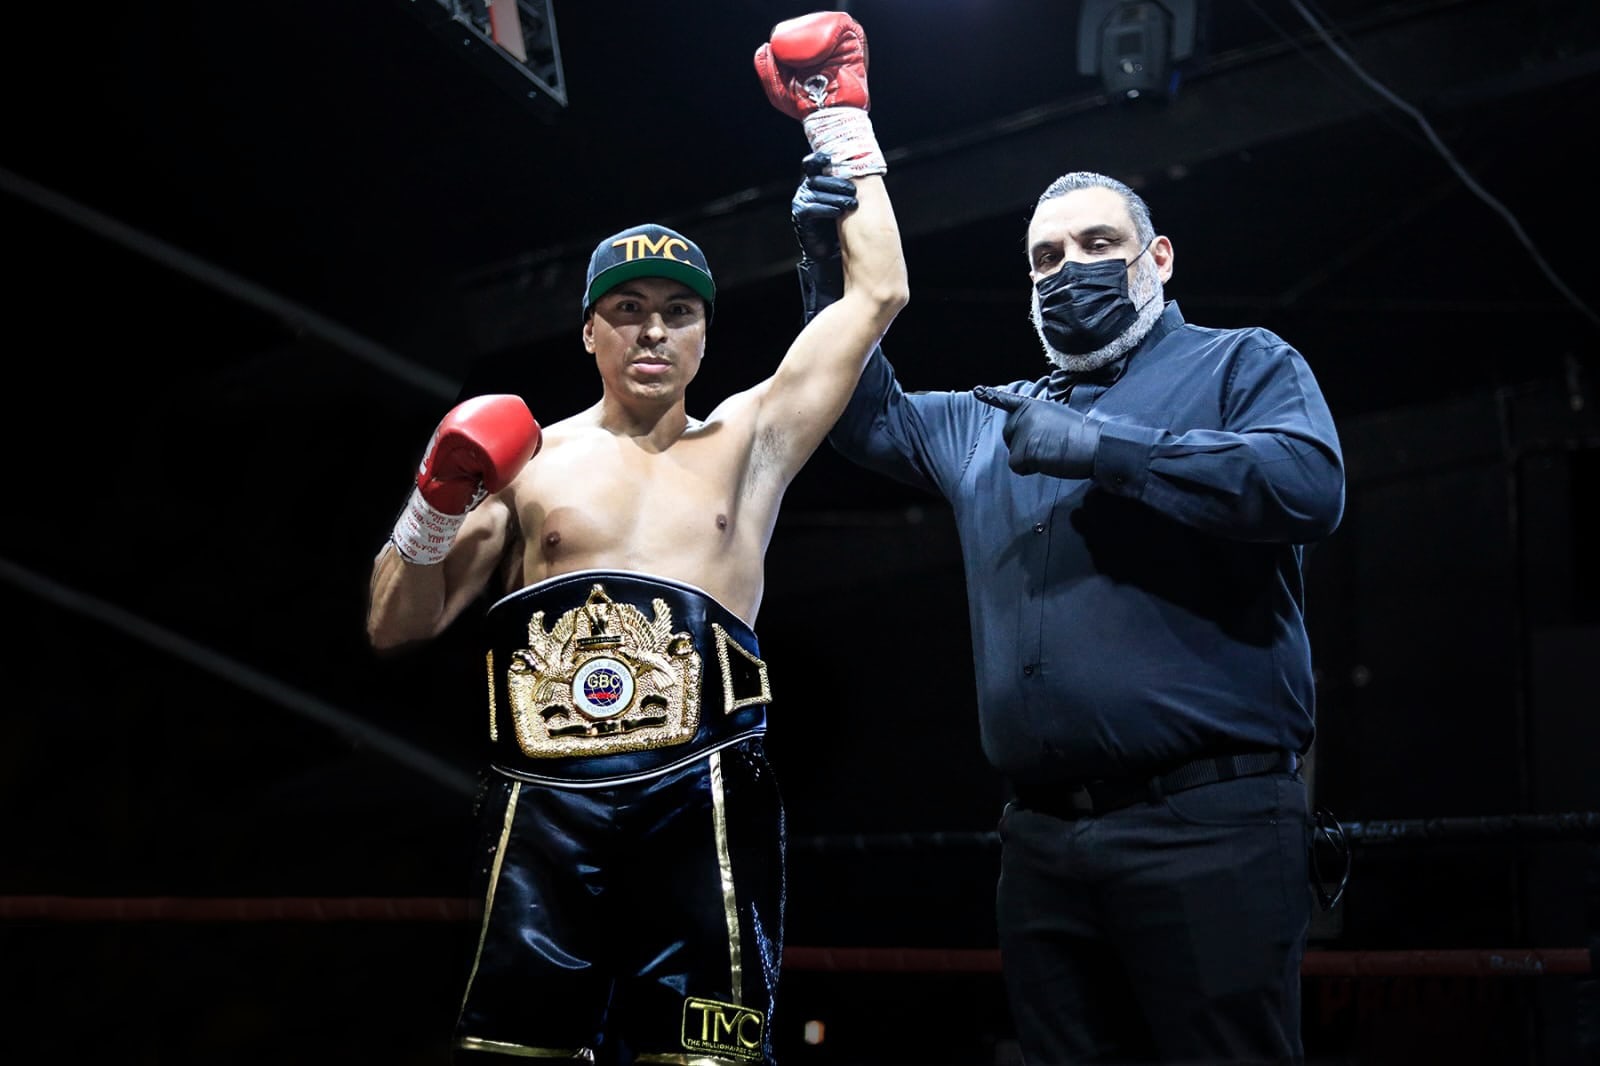 PROFESSIONAL UNDEFEATED BOXER PETER TURCIOS BECOMES A WORLD CHAMPION BY WINNING THE GLOBAL BOXING COUNCIL (GBC) WORLD CHAMPIONSHIP TITLE IN TIJUANA, MEXICO ON NOVEMBER 21, 2021